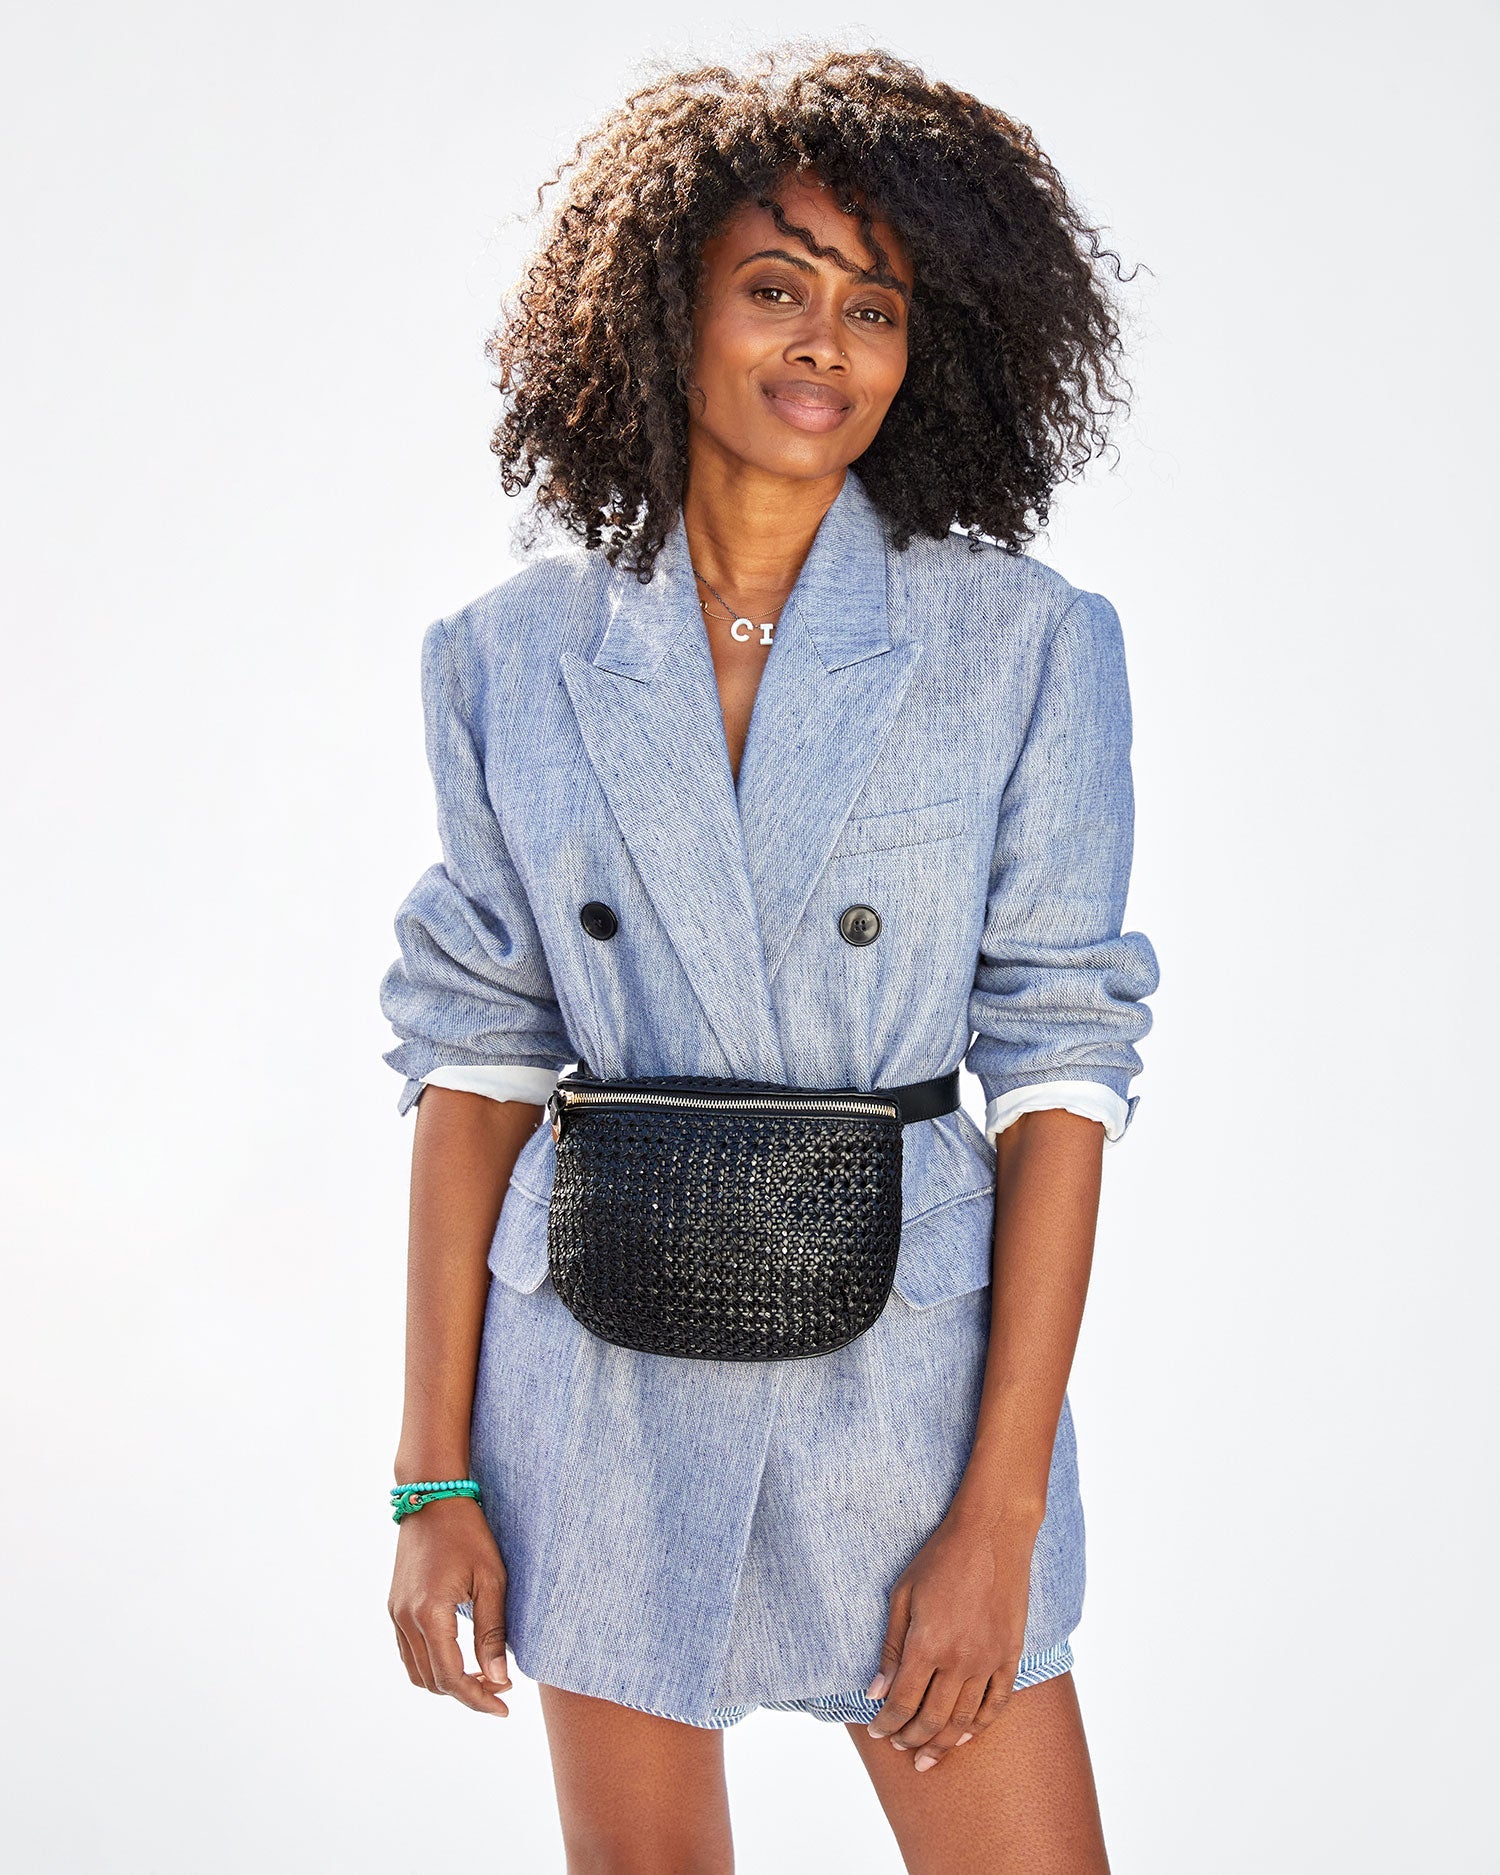 Clare V. - Flat Clutch with Tabs in Rattan